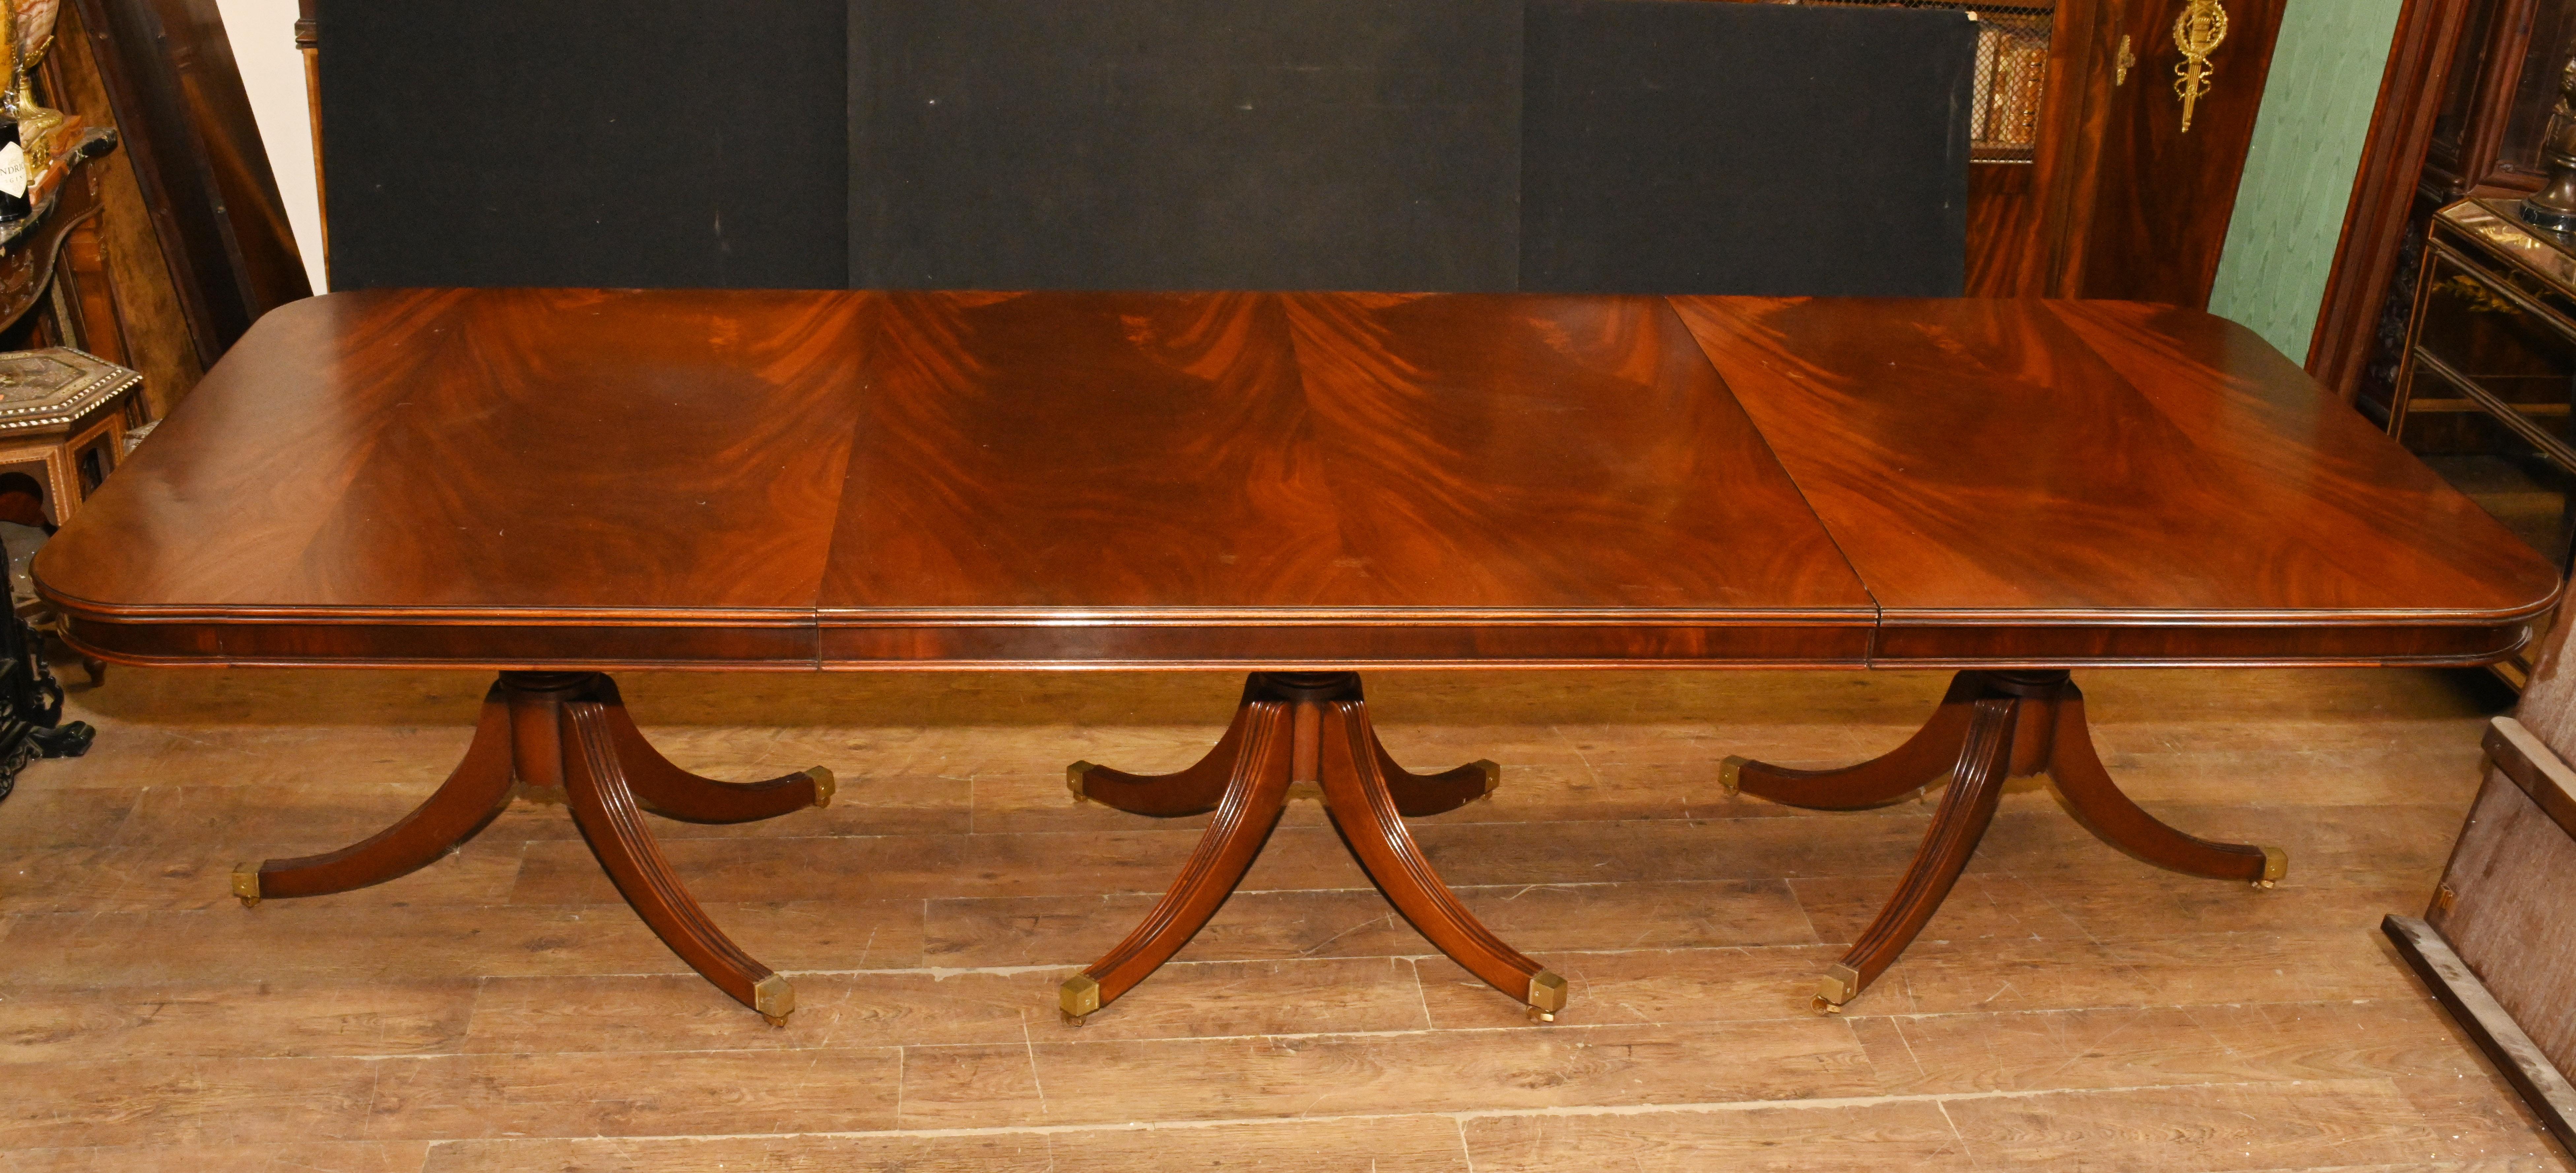 Regency Dining Table Mahogan Extending Regency Pedestal Base In Good Condition For Sale In Potters Bar, GB